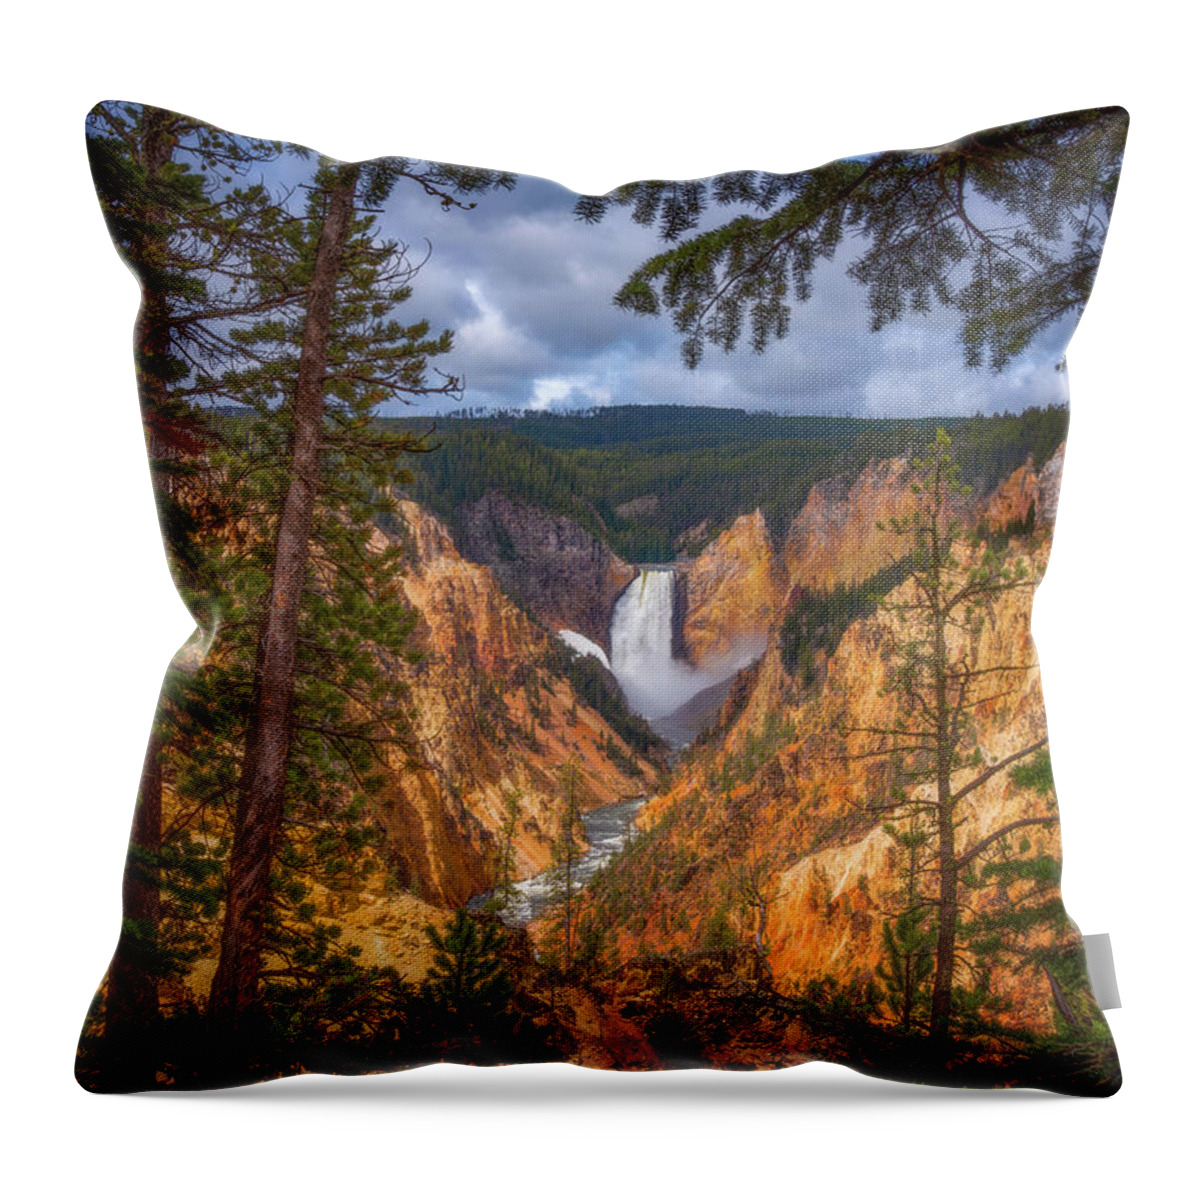 Waterfalls Throw Pillow featuring the photograph Artist Point Afternoon by Darren White